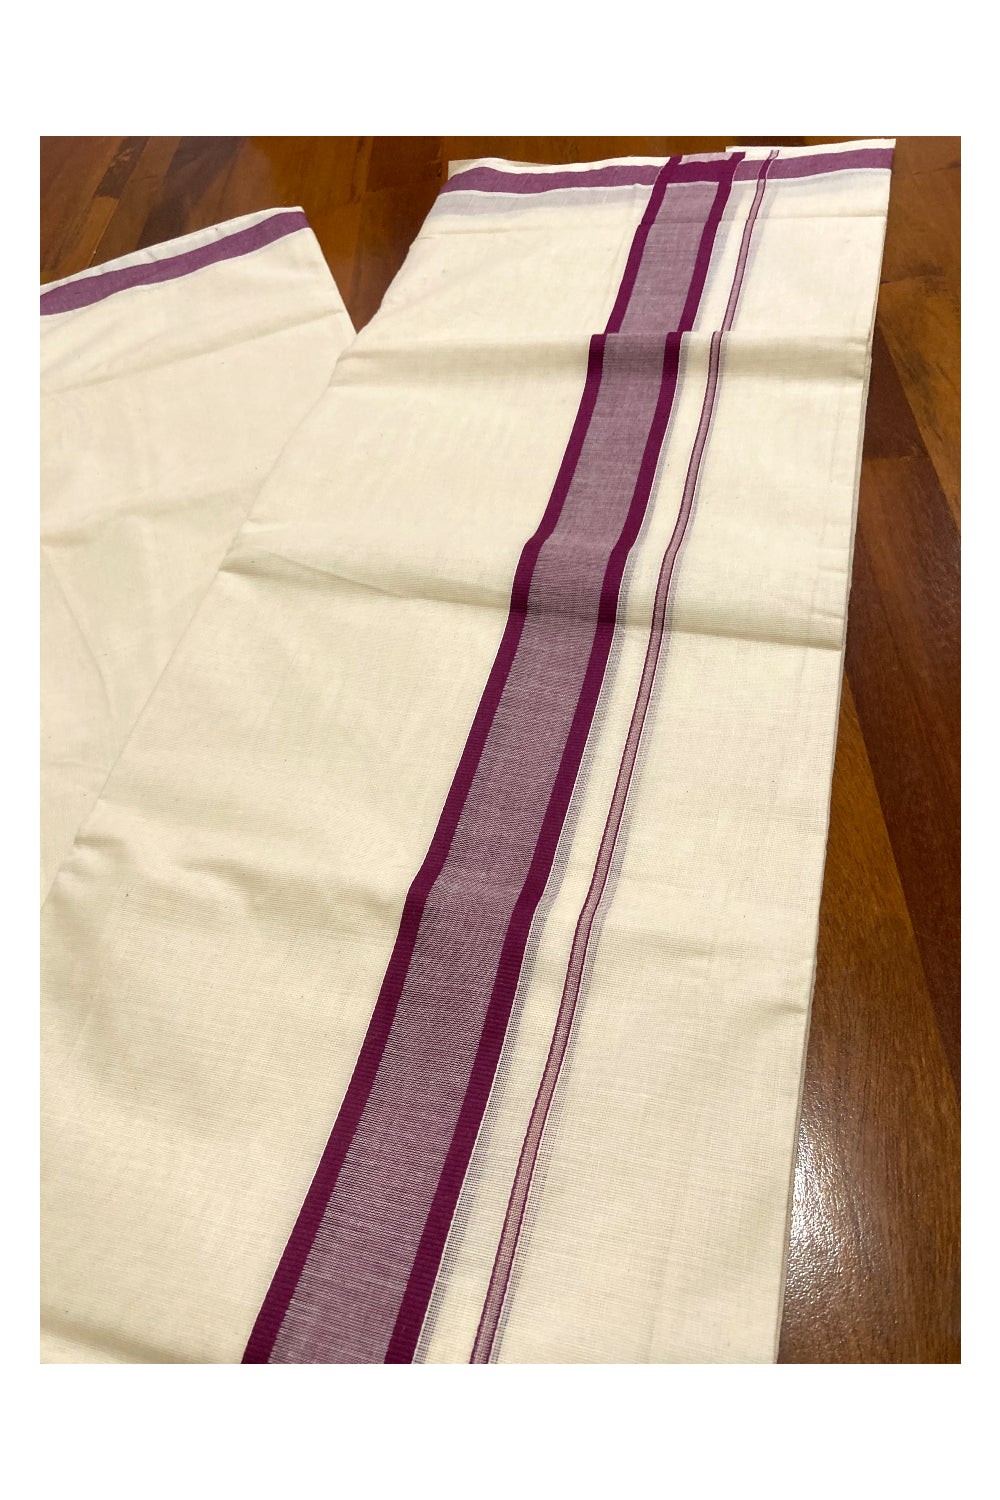 Off White Pure Cotton Double Mundu with Purple Border (South Indian Dhoti)